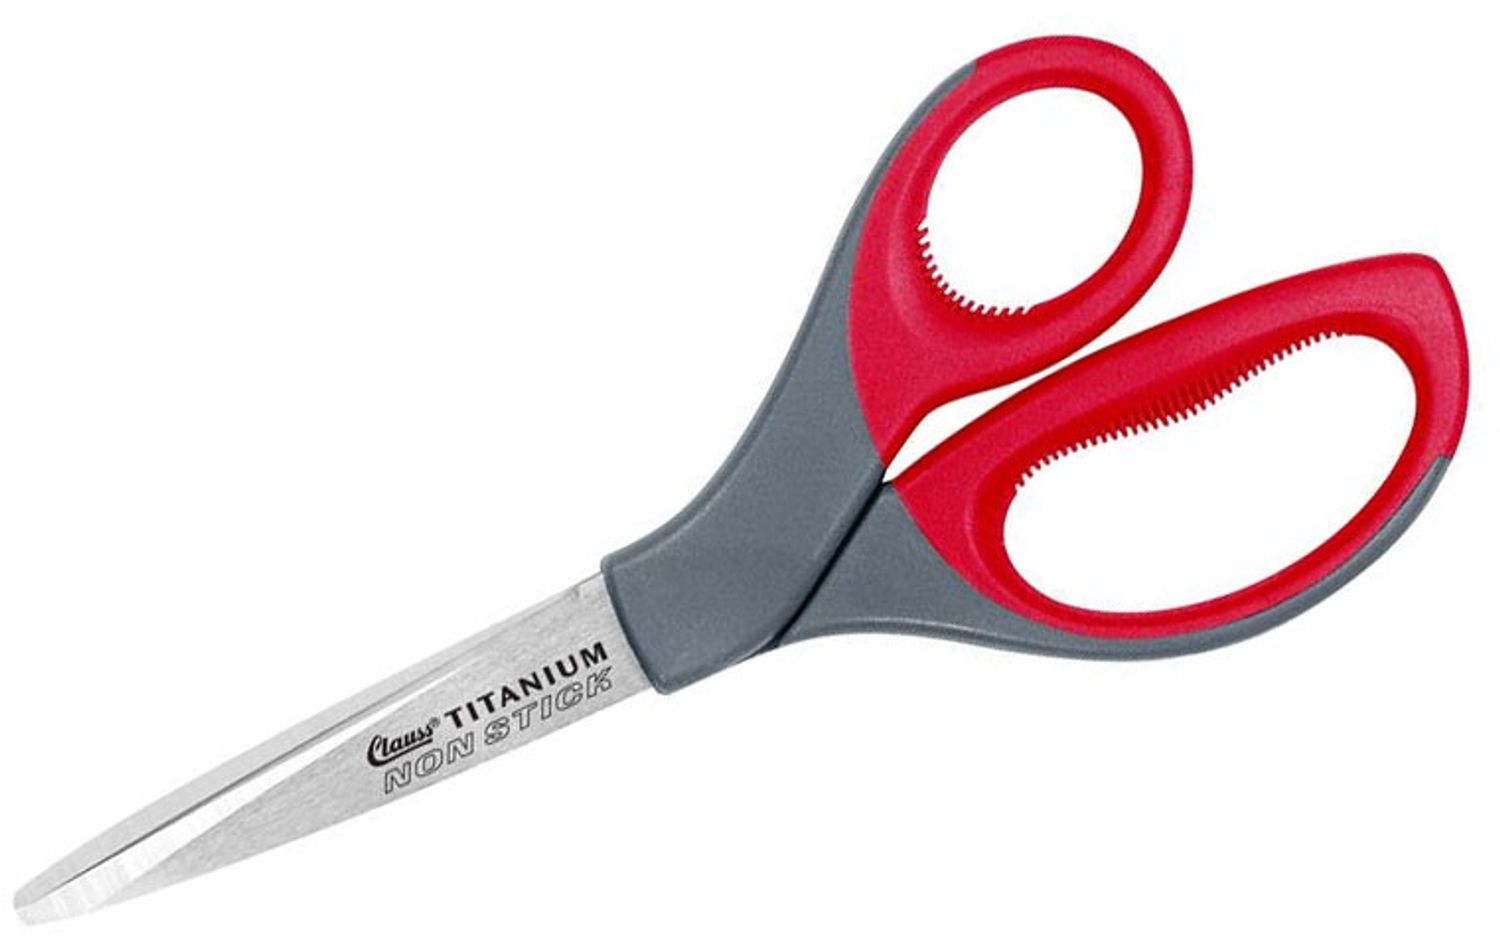 Victorinox Forschner All-Purpose Kitchen Shears with Bottle Opener (Old Sku  87771)